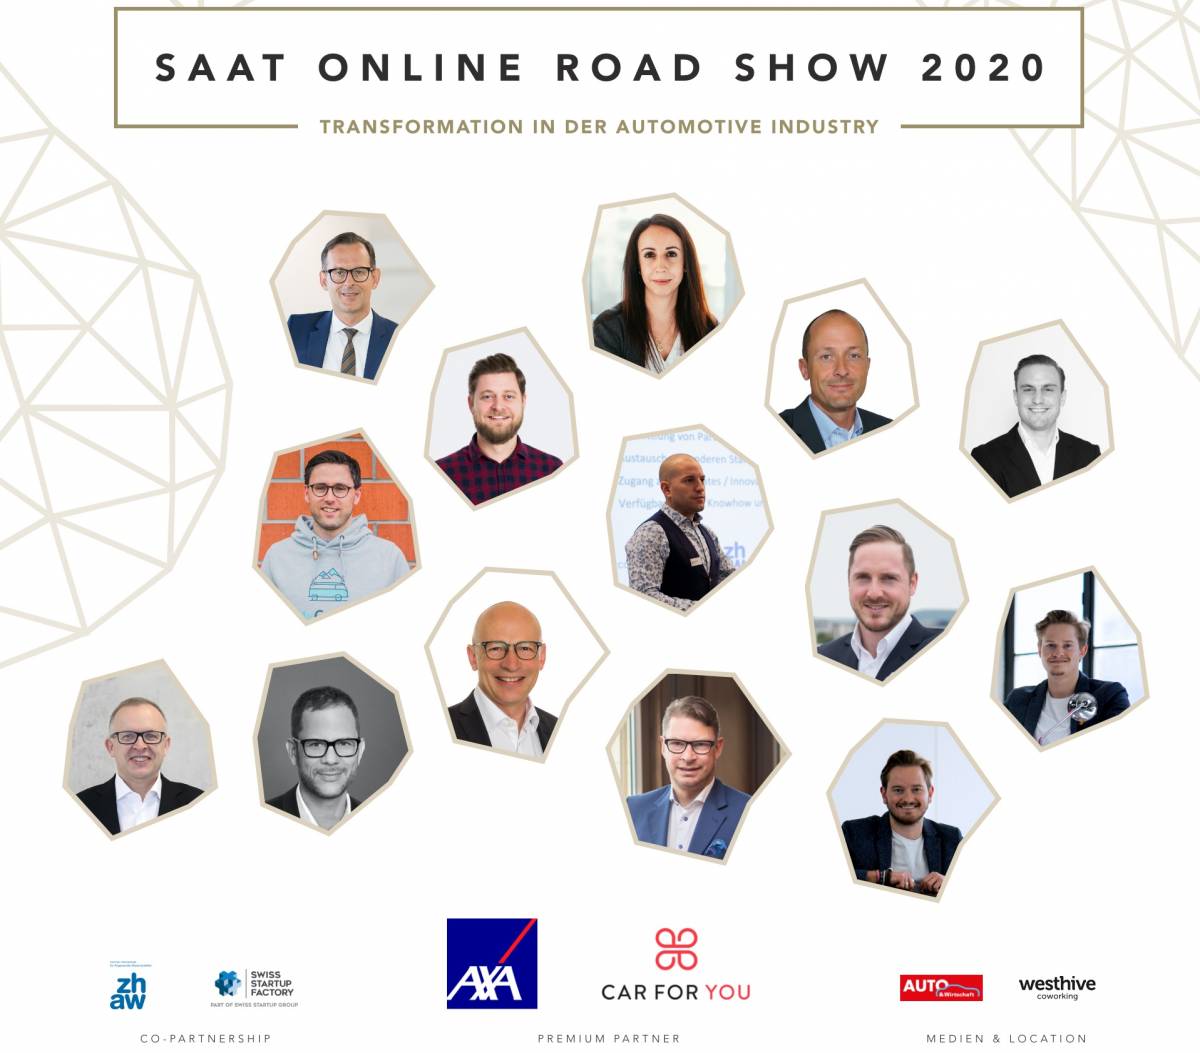 SAAT Online Road Show ab 25. August 2020 on Tour